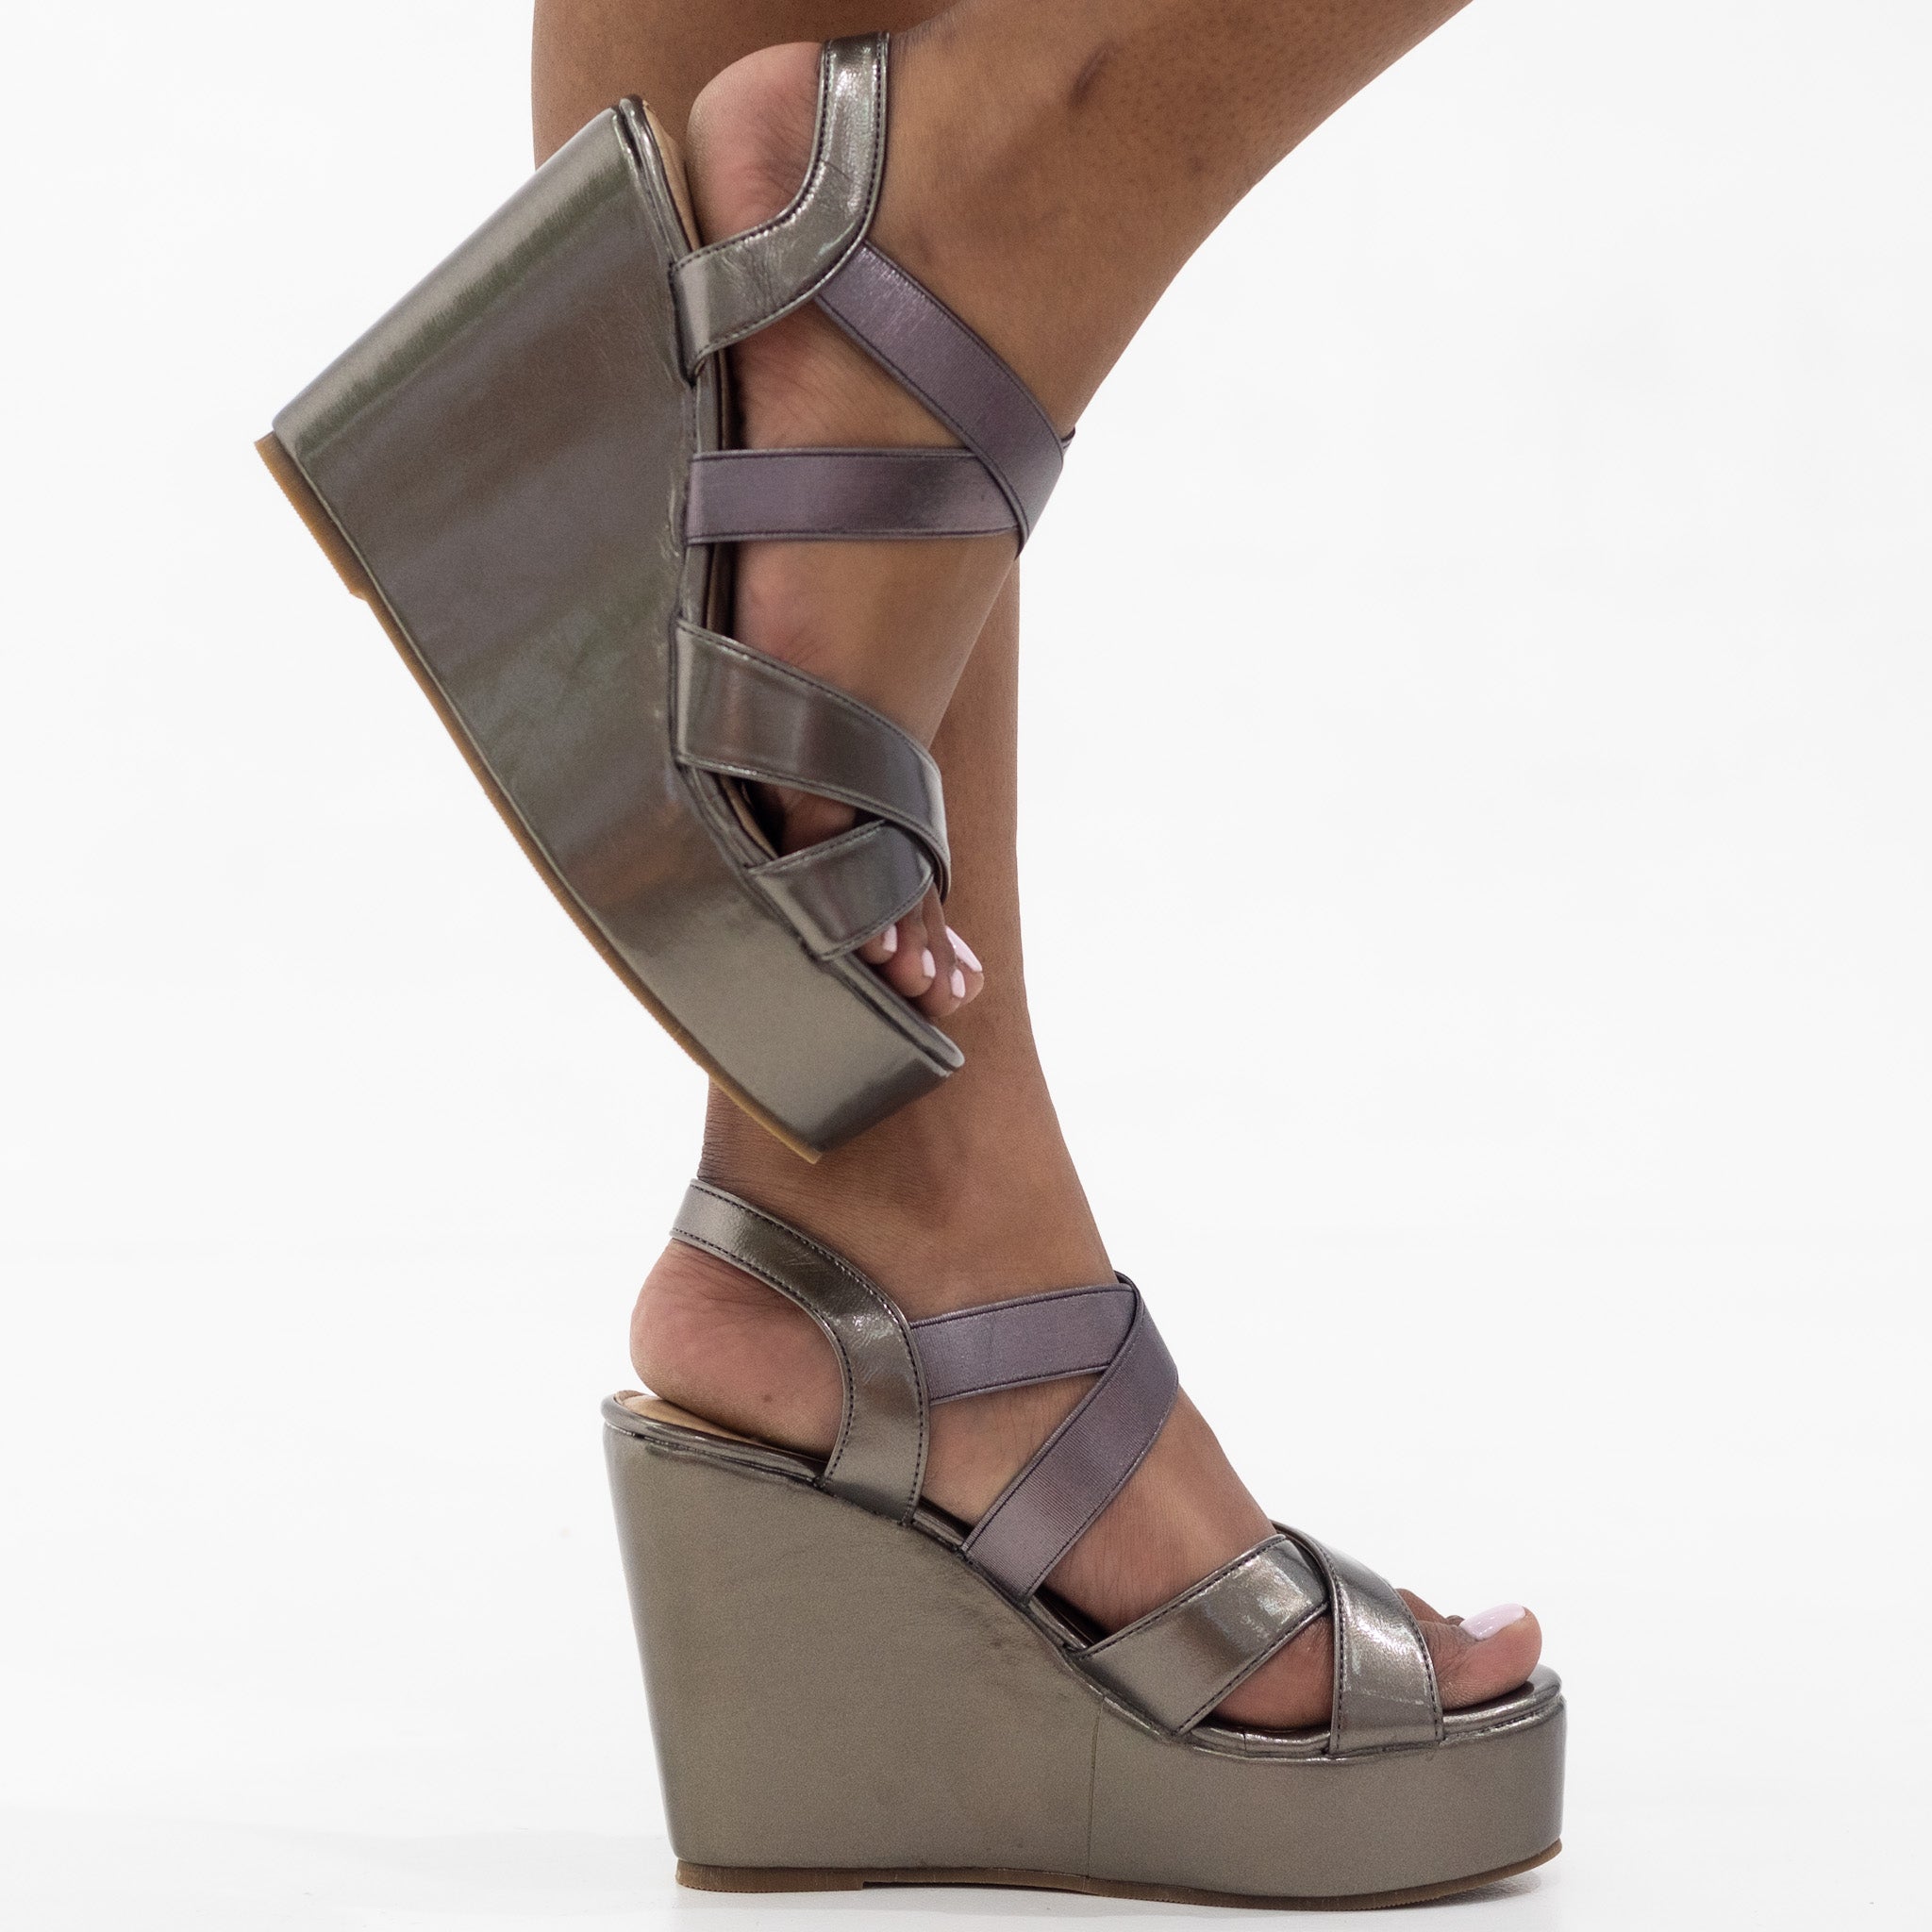 Ulalia strappy 11cm wedge sandals pewter